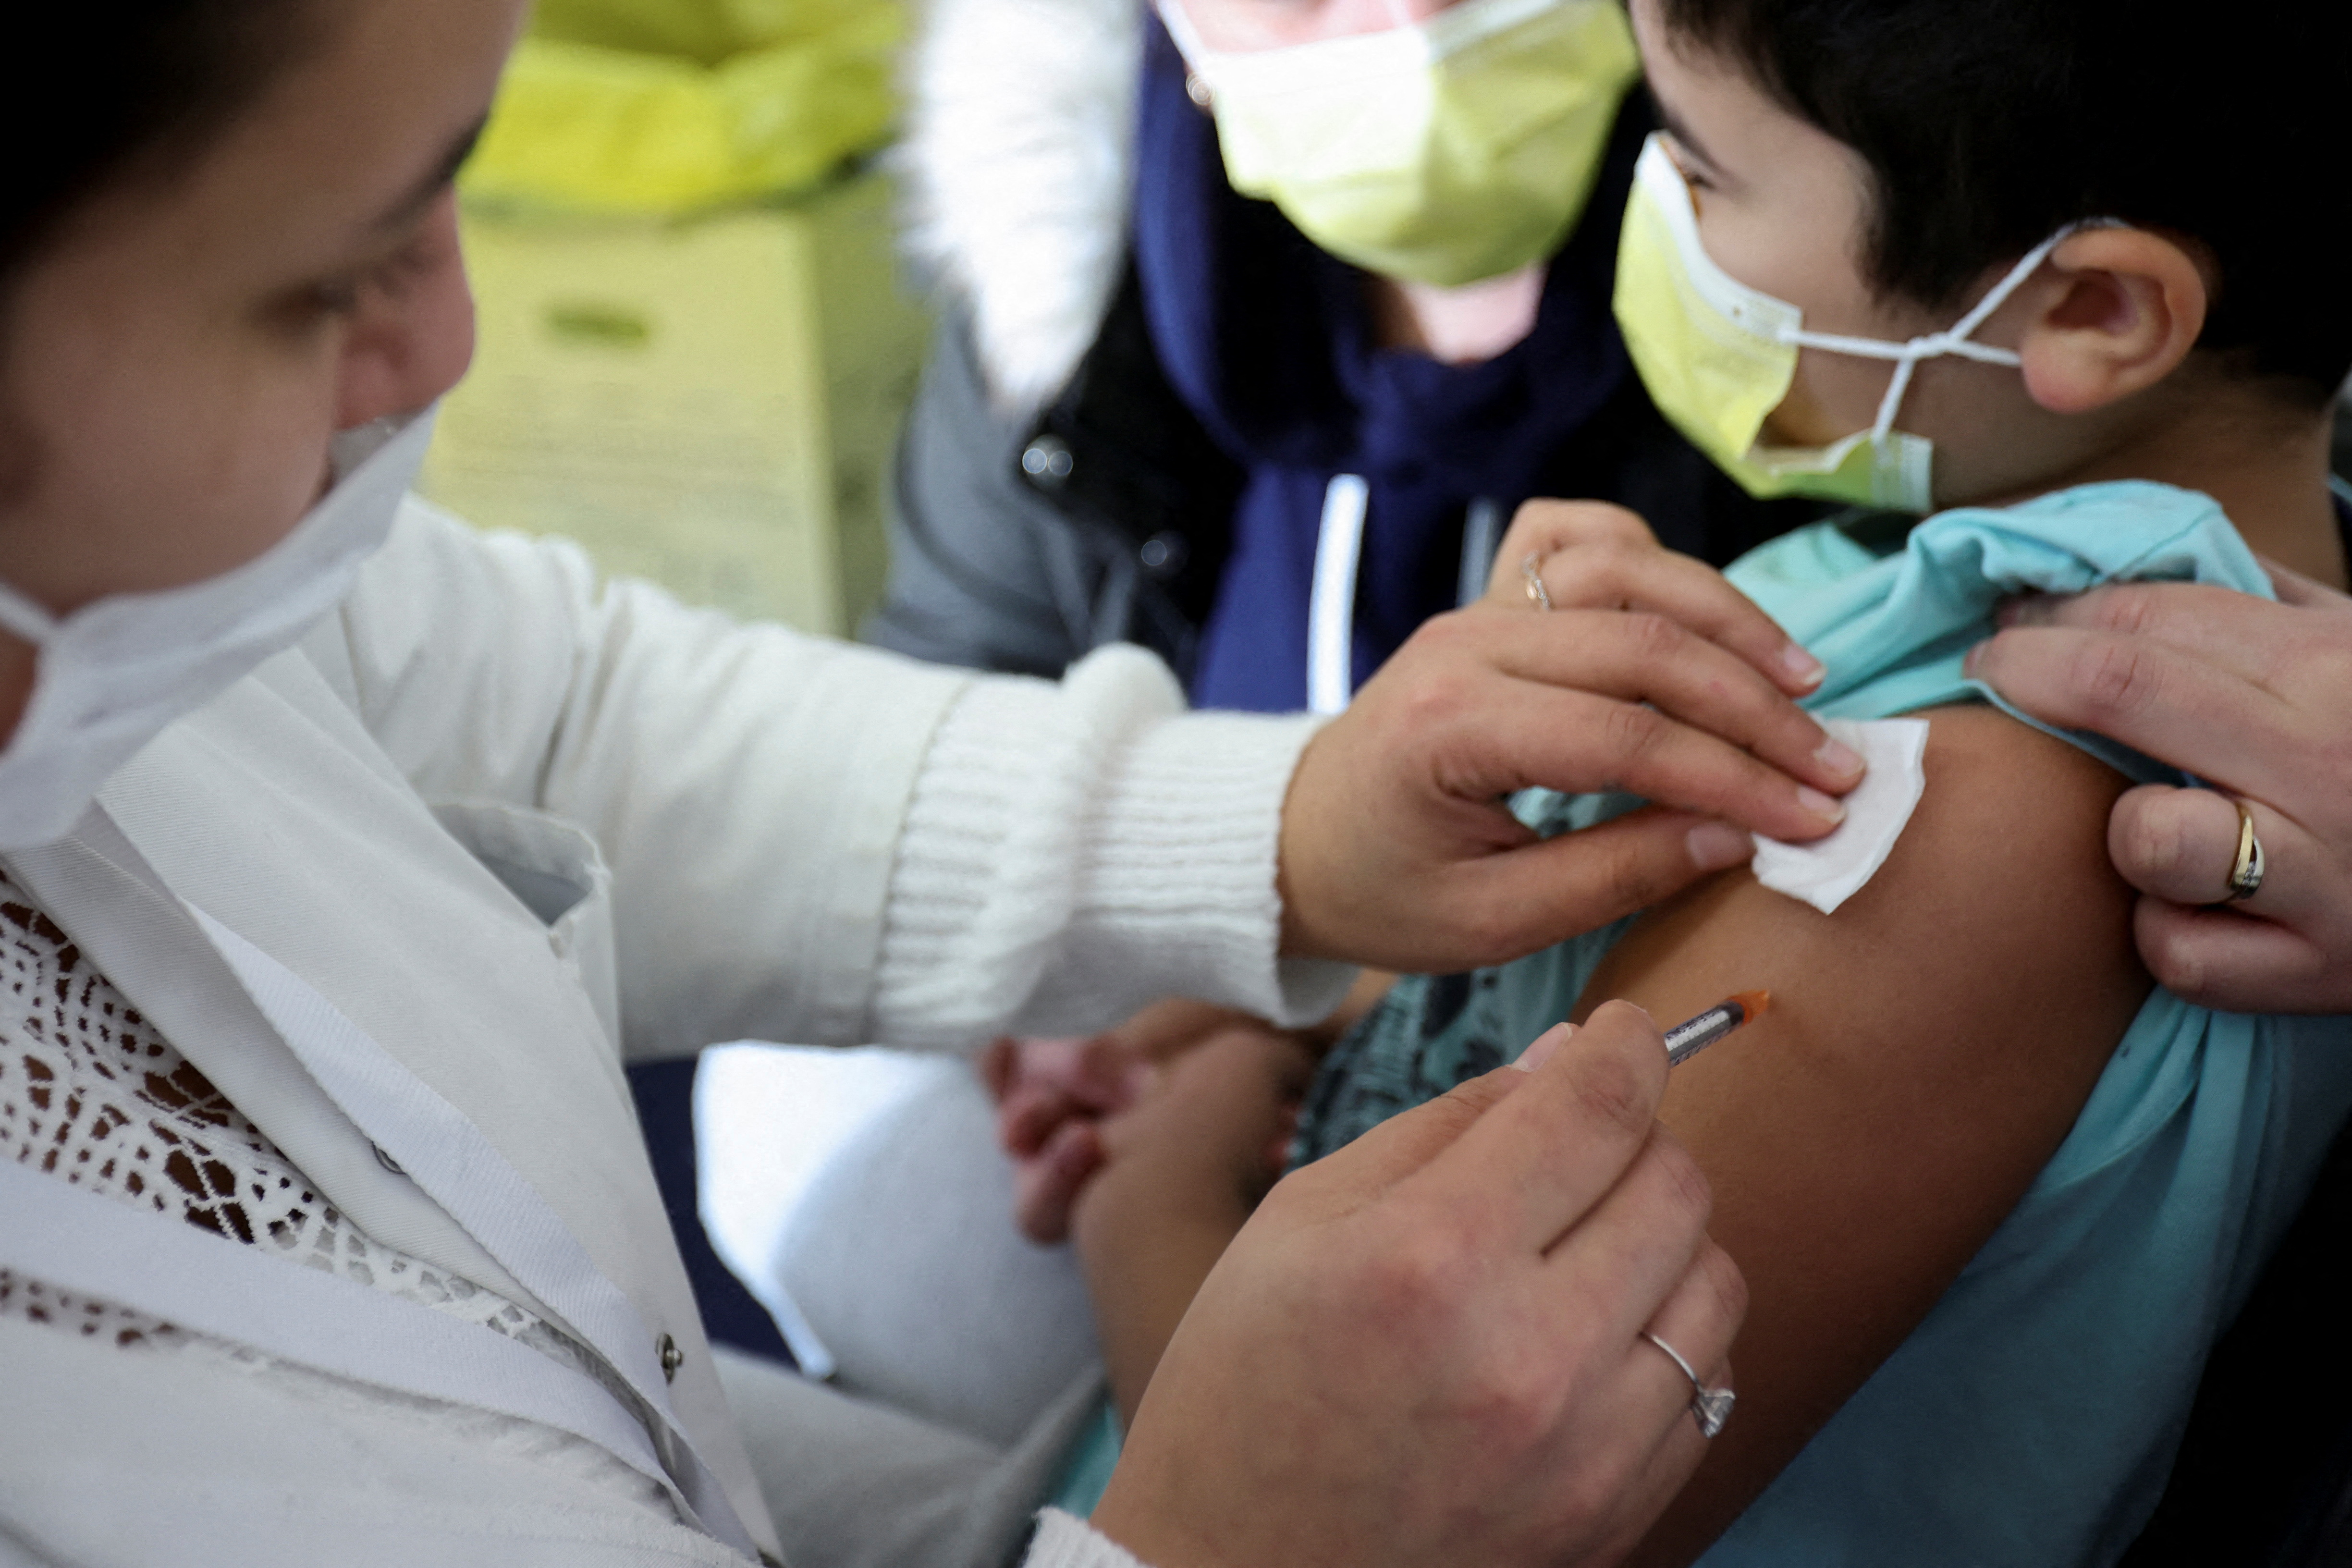 A medical worker administers a dose of a coronavirus disease (COVID-19) vaccine to a child at a vaccination centre in Les Pavillons-sous-Bois, near Paris, France, December 18, 2021. REUTERS/Sarah Meyssonnier